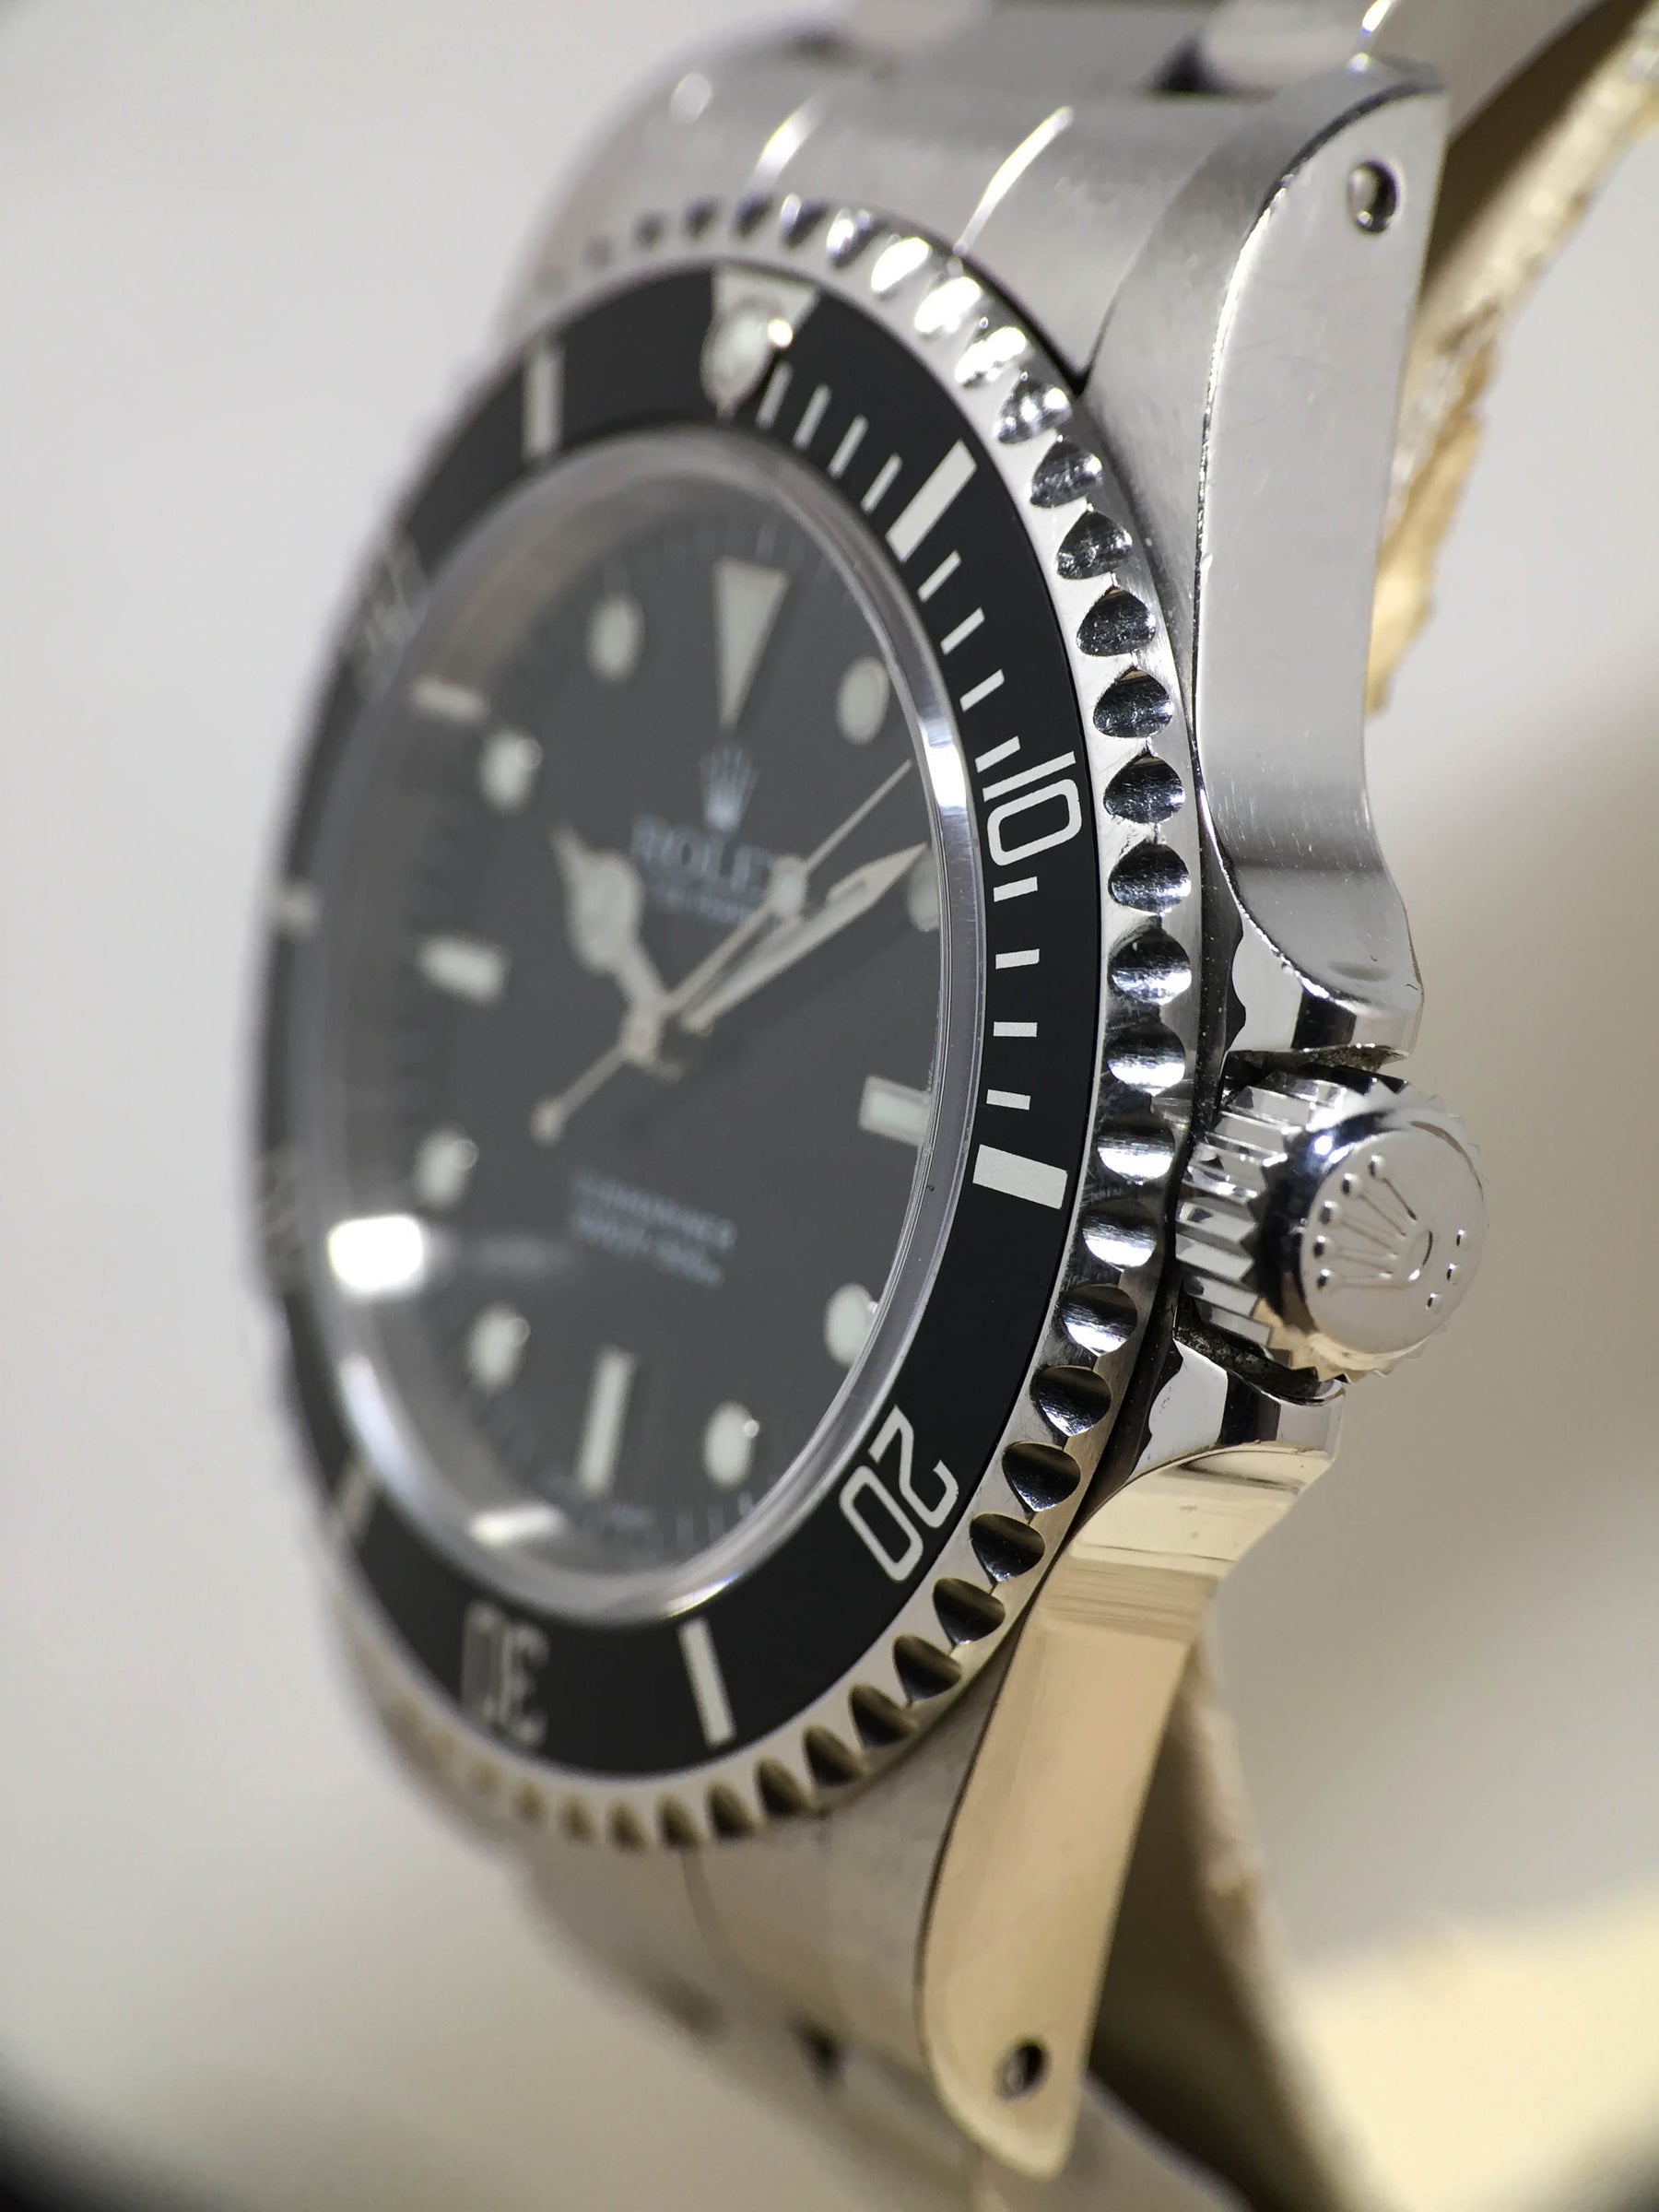 2004 Rolex Submariner Ref. 14060M (with Box & Papers)